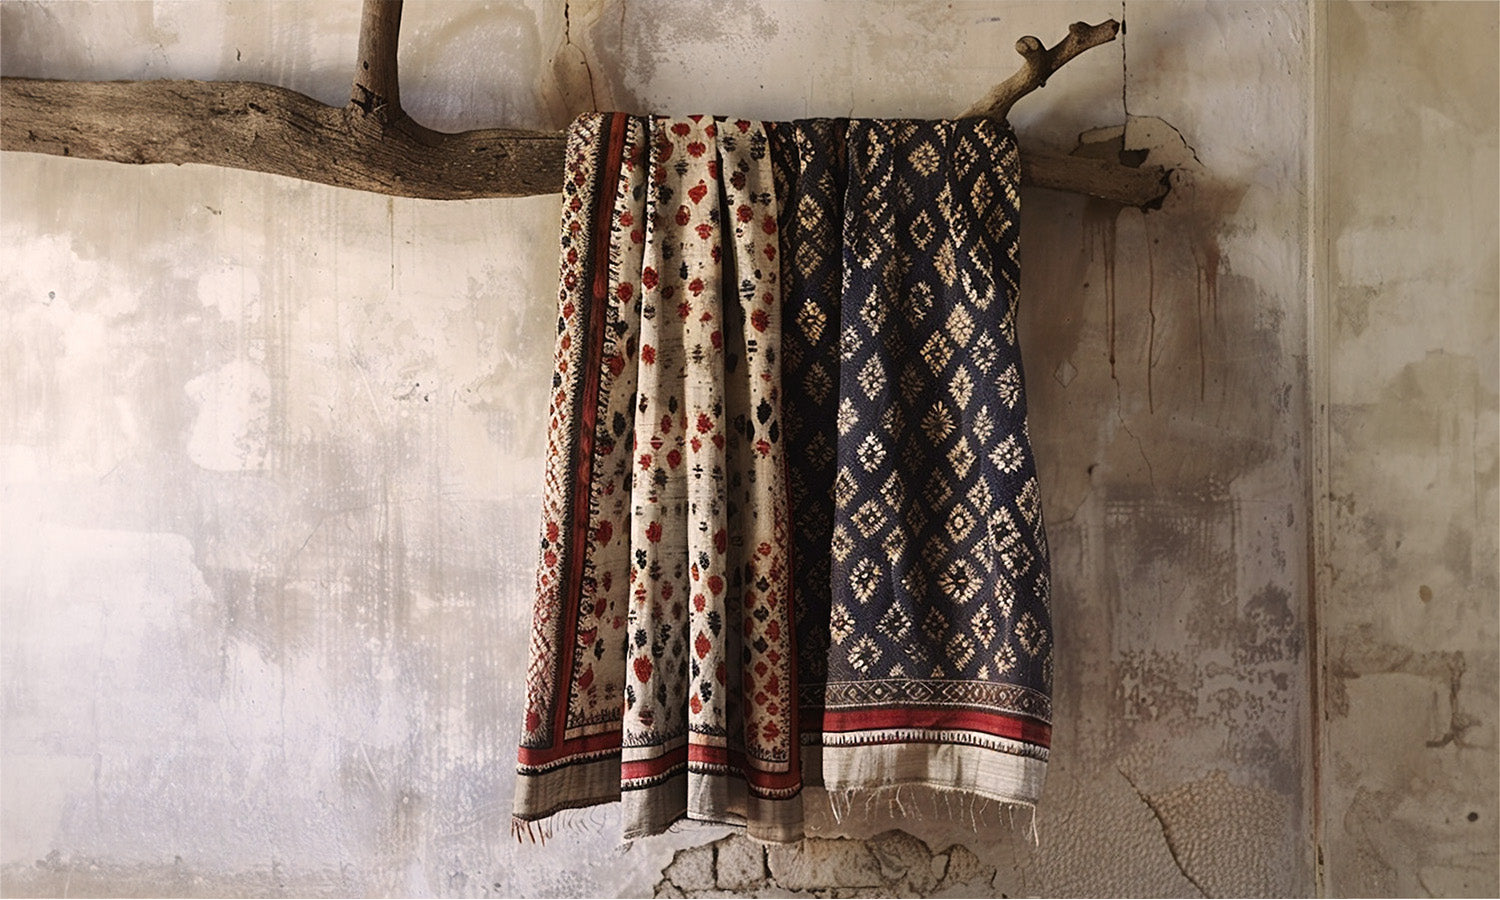 Indian Textiles - Ancient and Diverse